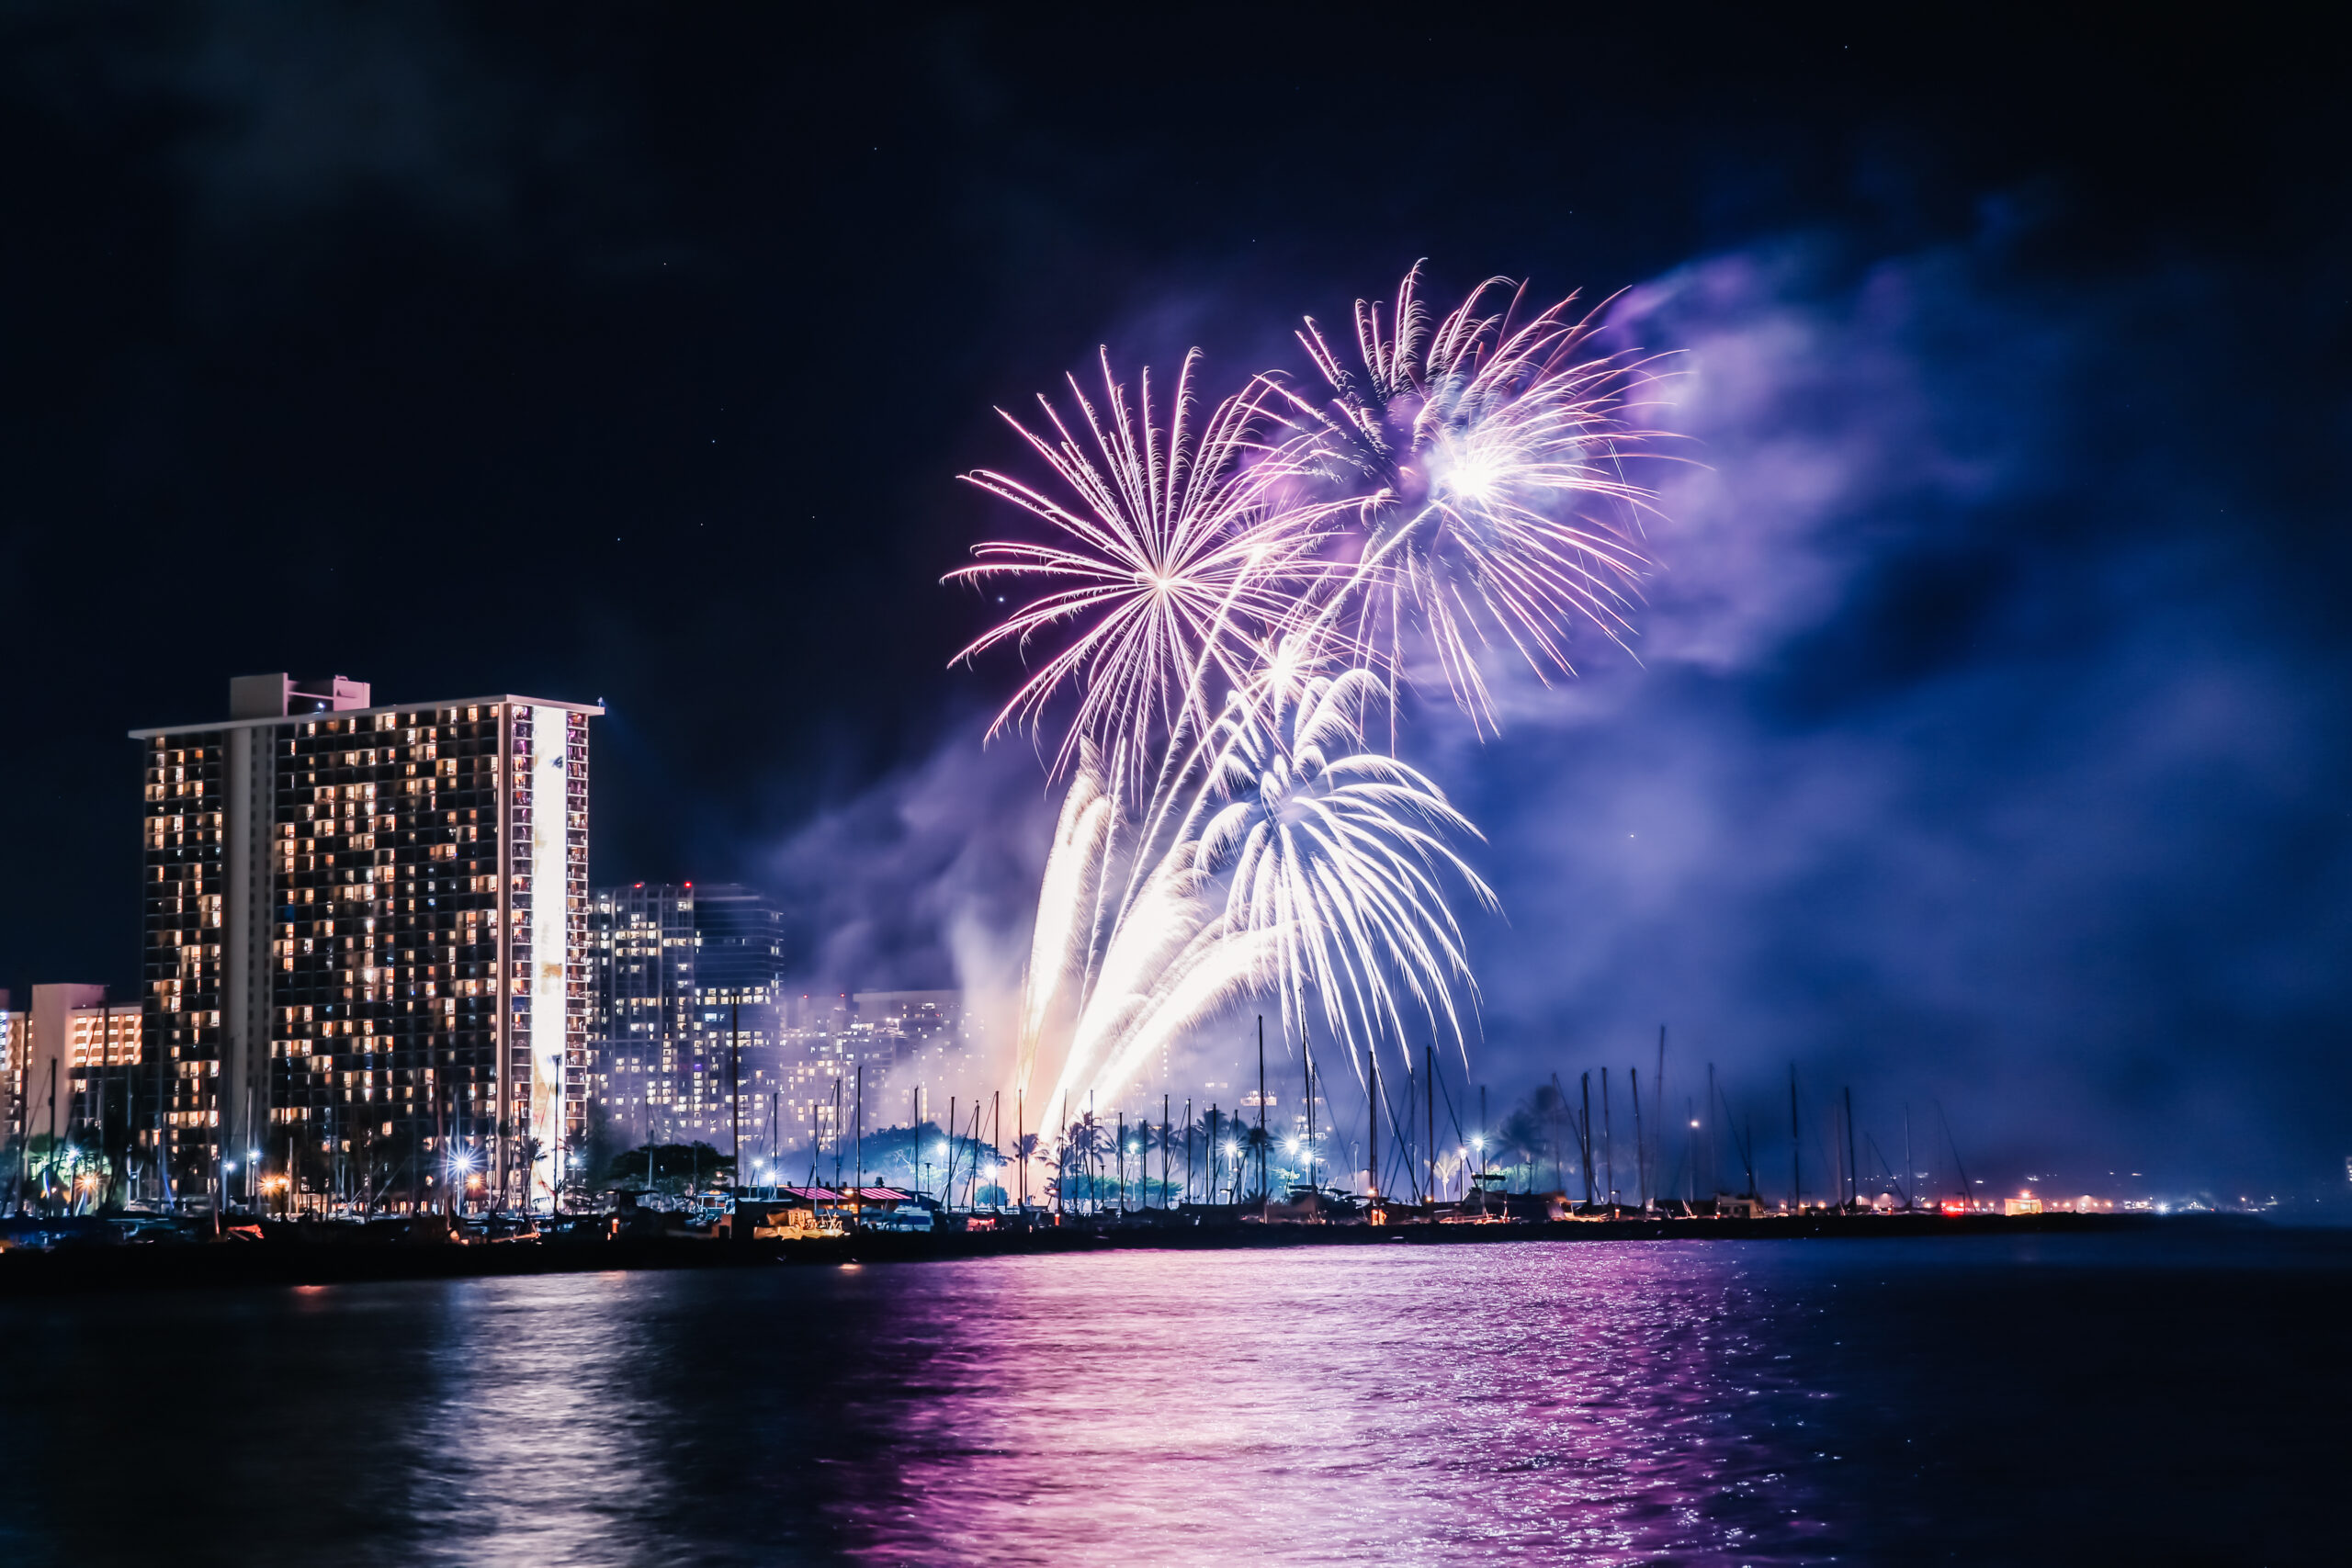 Fireworks lighting up the sky above Waikiki Beach, creating a vibrant and dazzling display.